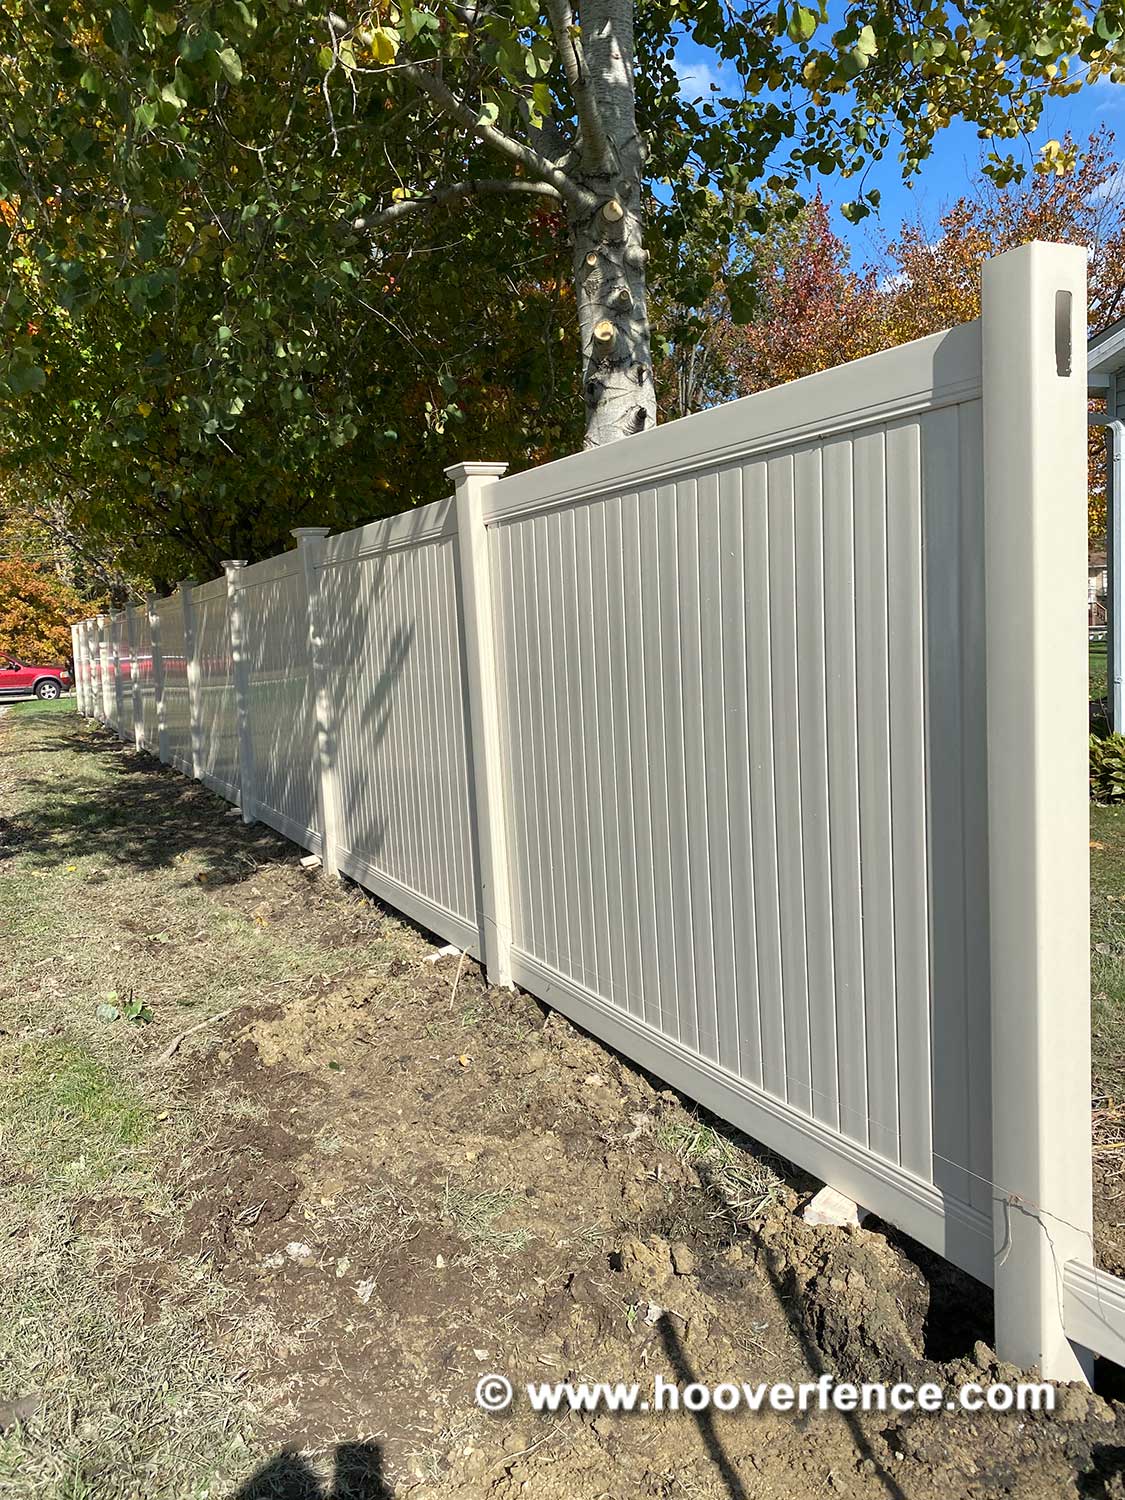 Hoover Fence Co Installation - 6'H Almond New Lexington Privacy Fence Installation - Ravenna, OH